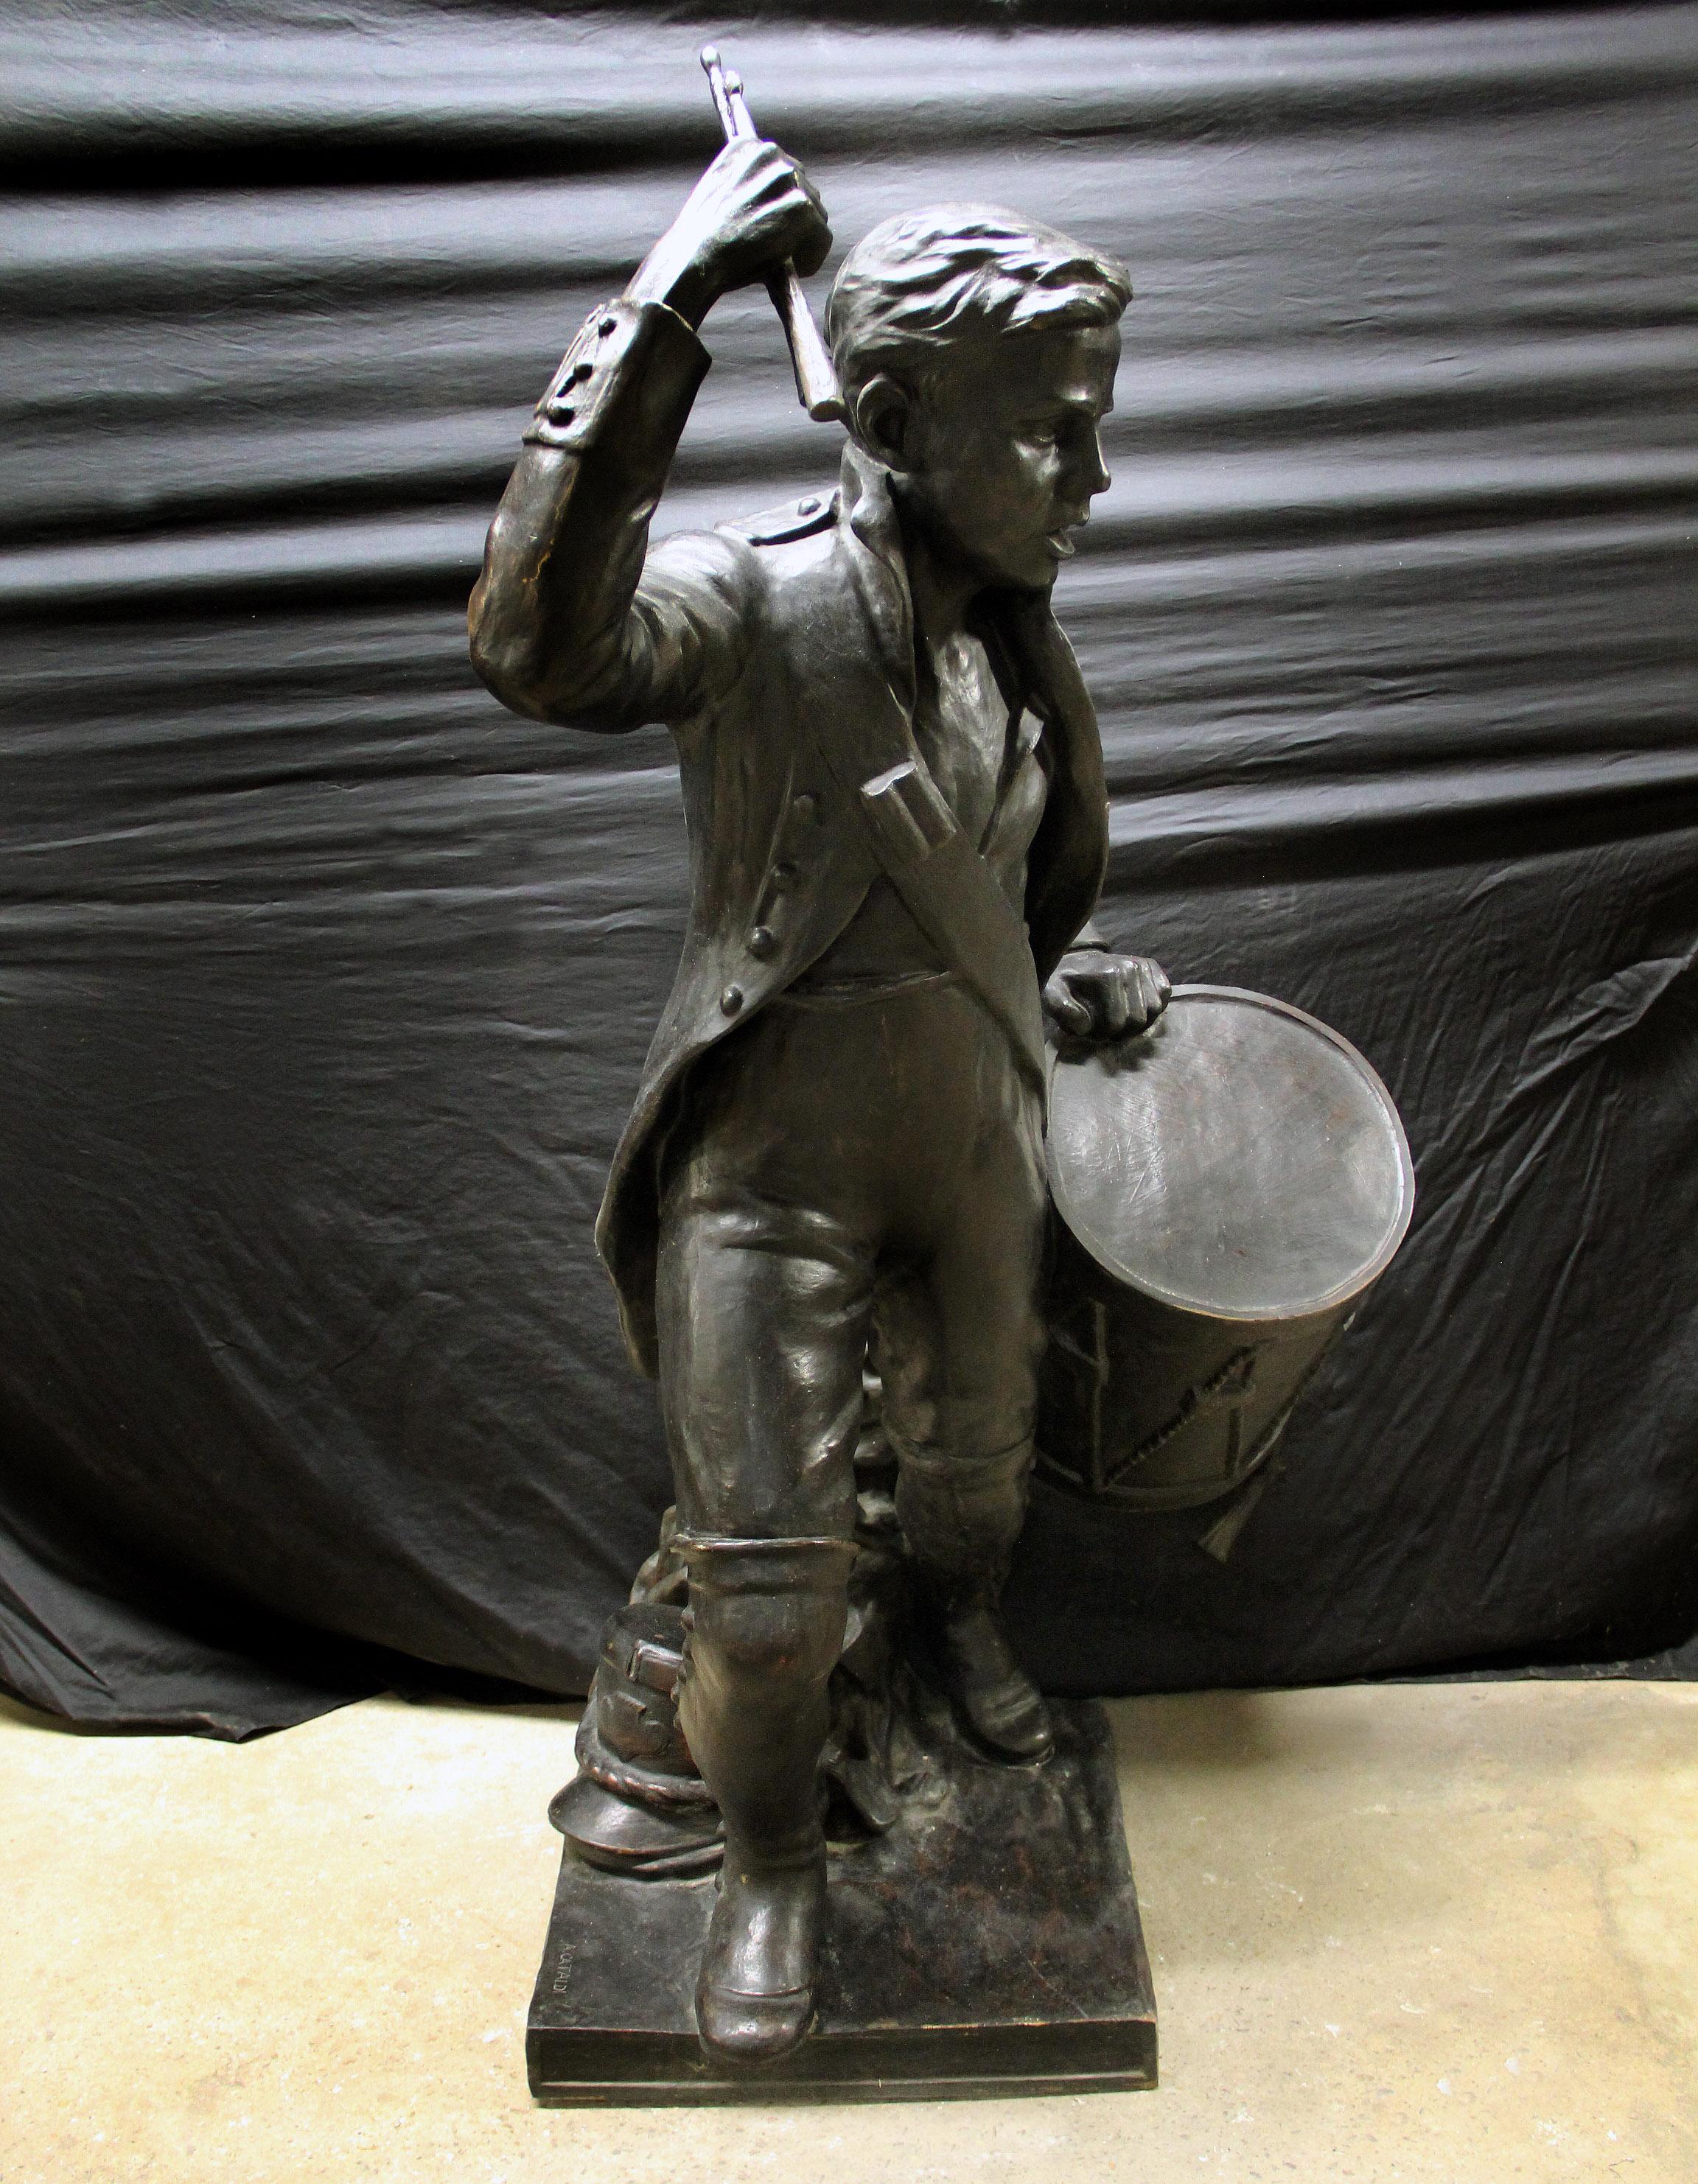 A unique and impressive late 19th century life-size bronze of a drummer boy by Léon Fagel and Amleto Cataldi

Léon Fagel and Amleto Cataldi

Depicting a life-size French soldier boy marching with his drumsticks in one hand up in the air and